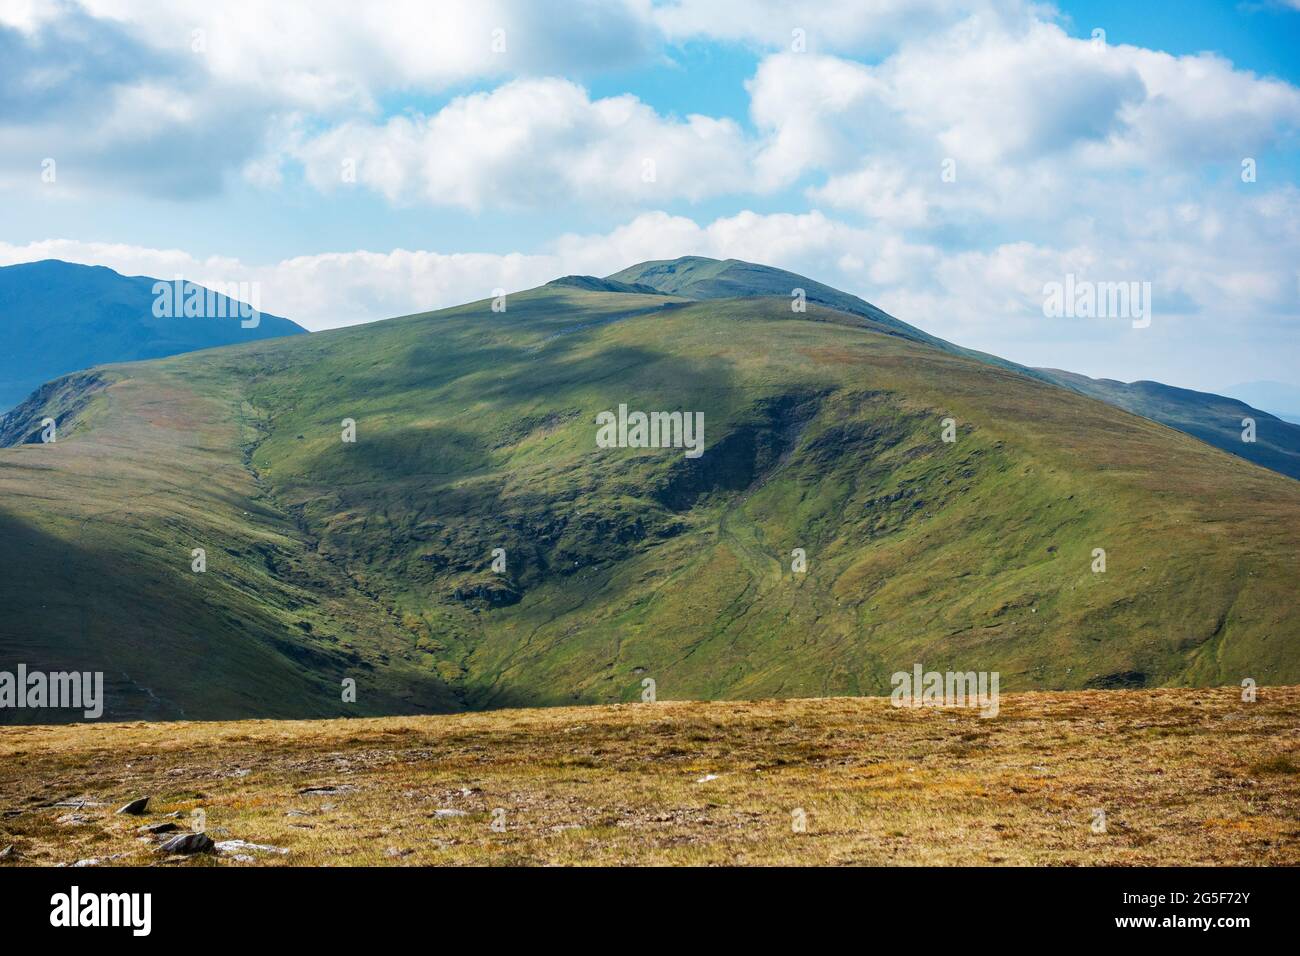 The munro mountain of Meall Corranaich, part of the Ben Lawers range in Scotland Stock Photo